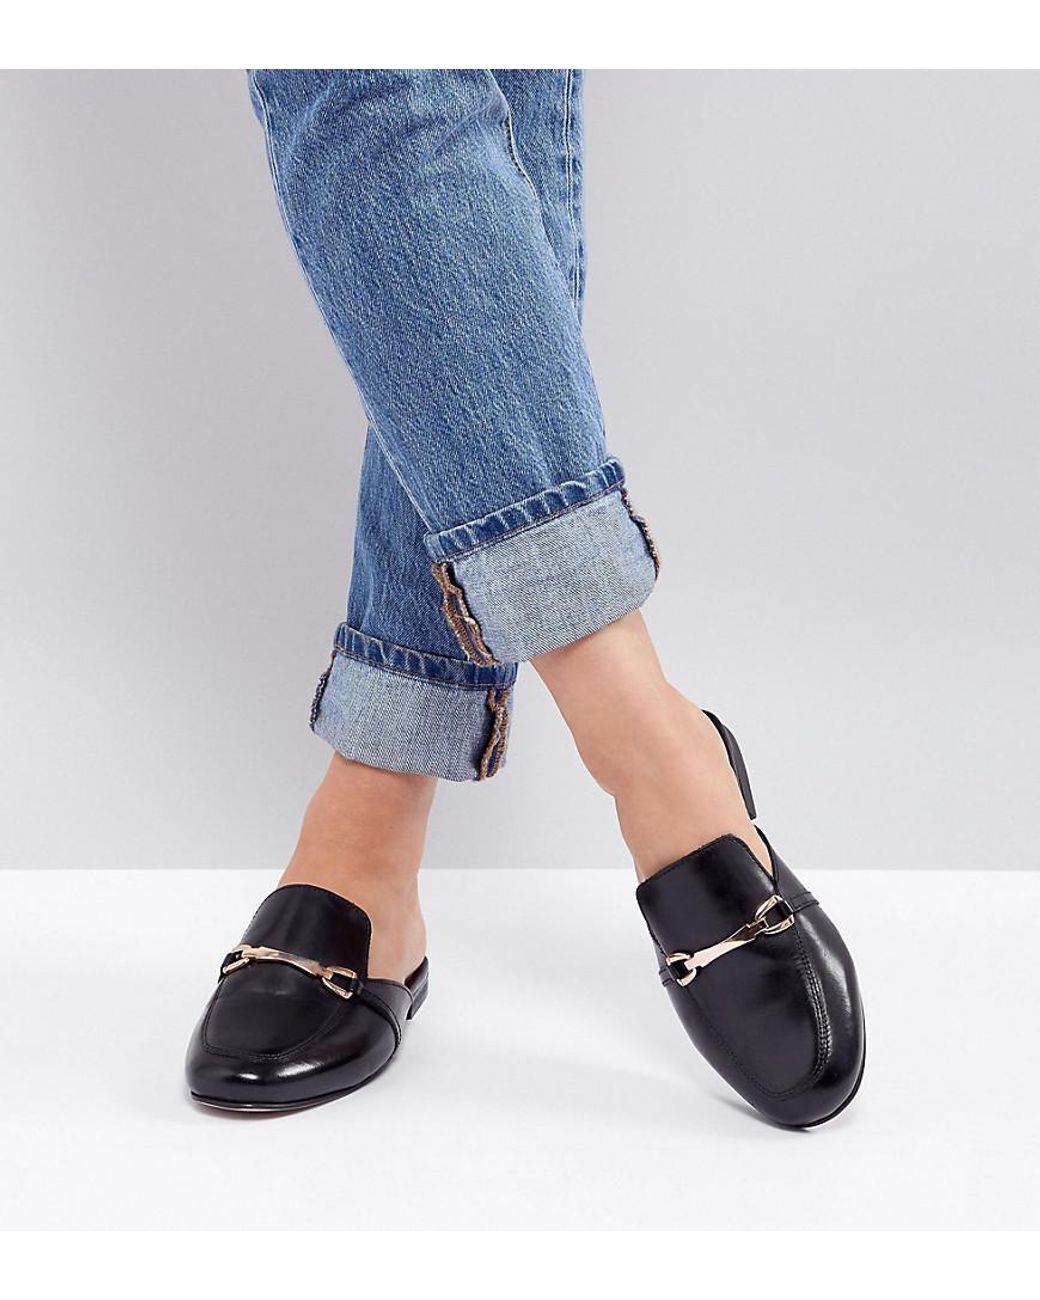 ASOS Movie Wide Fit Leather Mule Loafers in Black | Lyst